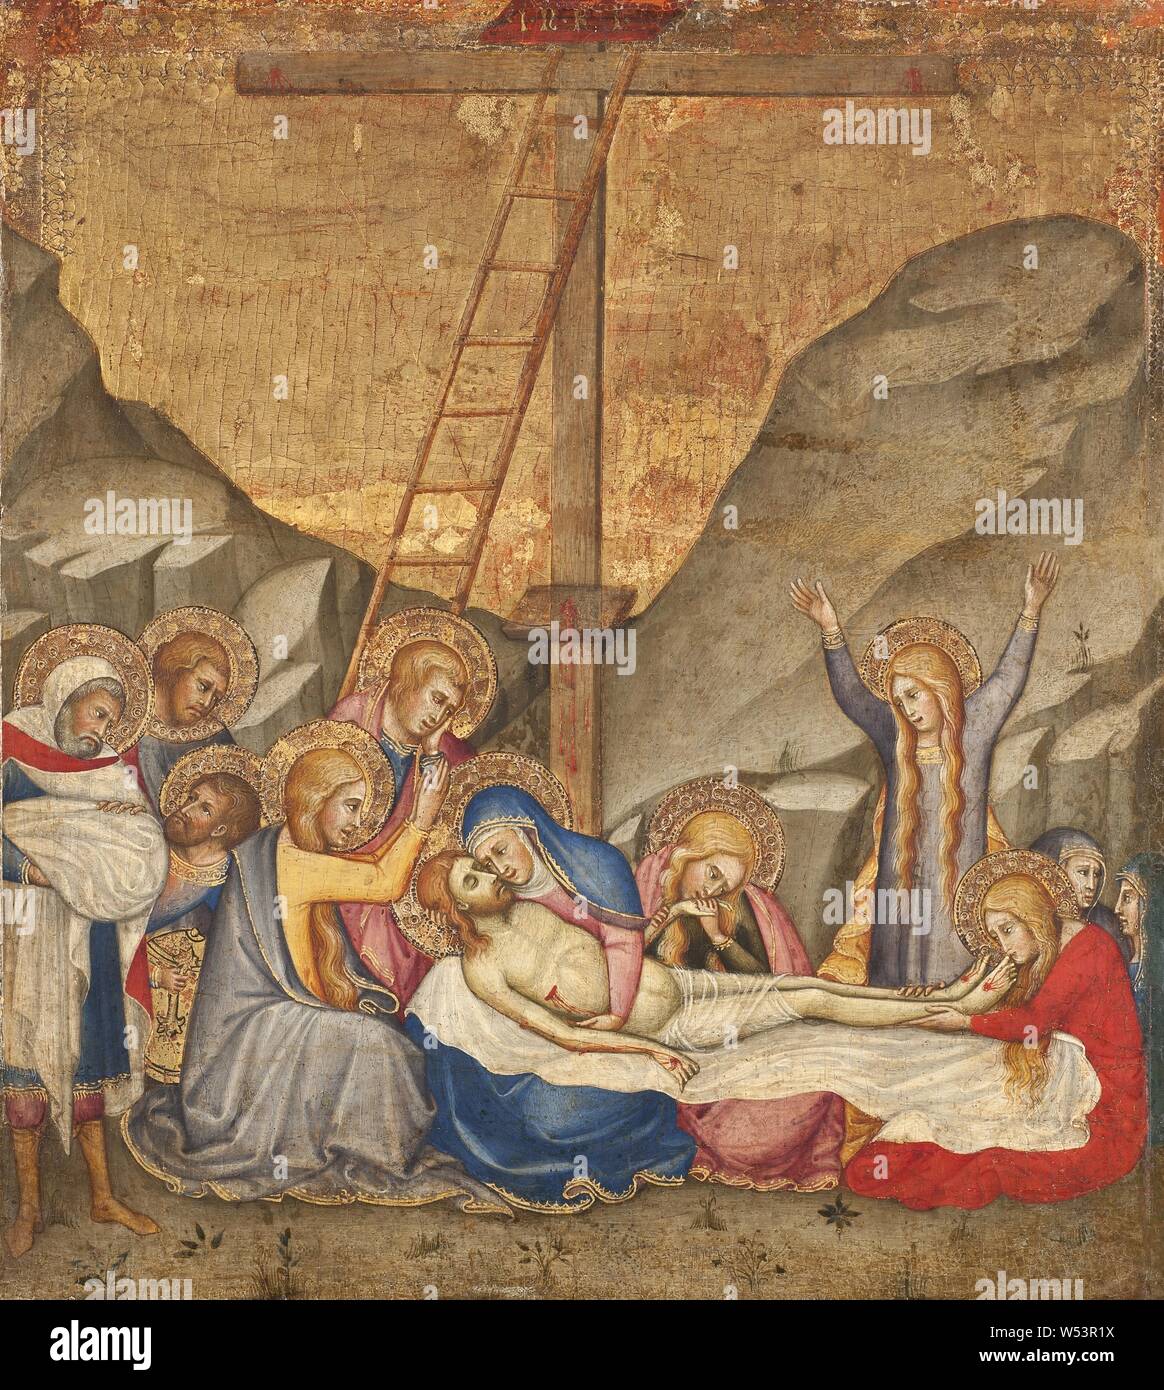 Andrea di Bartolo, The Lamentation, Christ's budget, painting, religious art, Oil on wood, Height, 54 cm (21.2 inches), Width, 49 cm (19.2 inches) Stock Photo